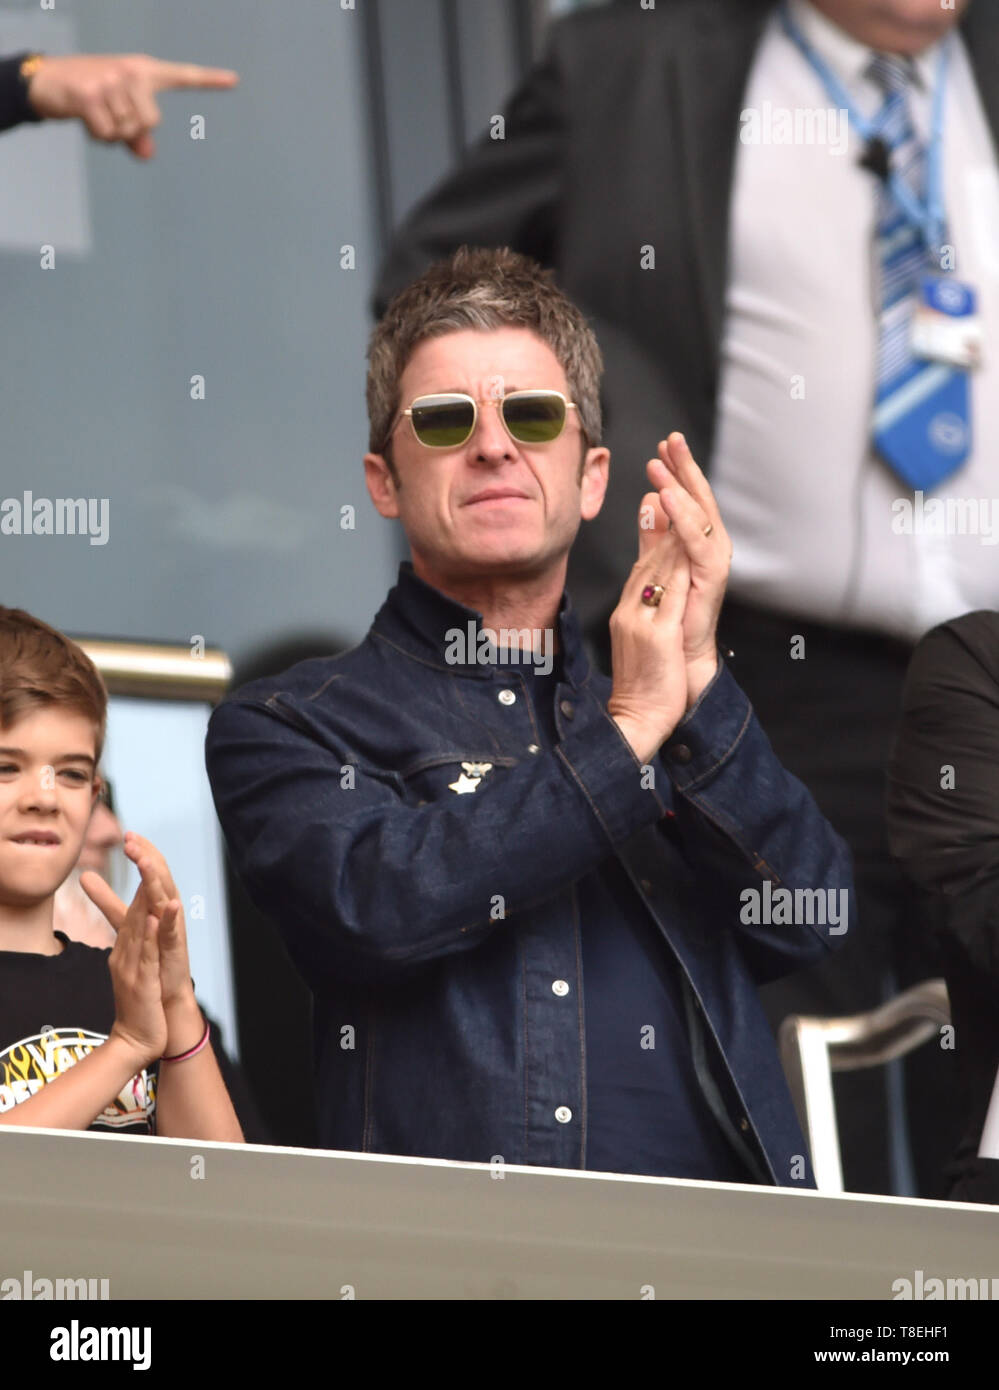 Noel Gallagher celebrates City's second goal during the Premier League match between Brighton & Hove Albion and Manchester City  at the American Express Community Stadium 12 May 2019 Editorial use only. No merchandising. For Football images FA and Premier League restrictions apply inc. no internet/mobile usage without FAPL license - for details contact Football Dataco Stock Photo